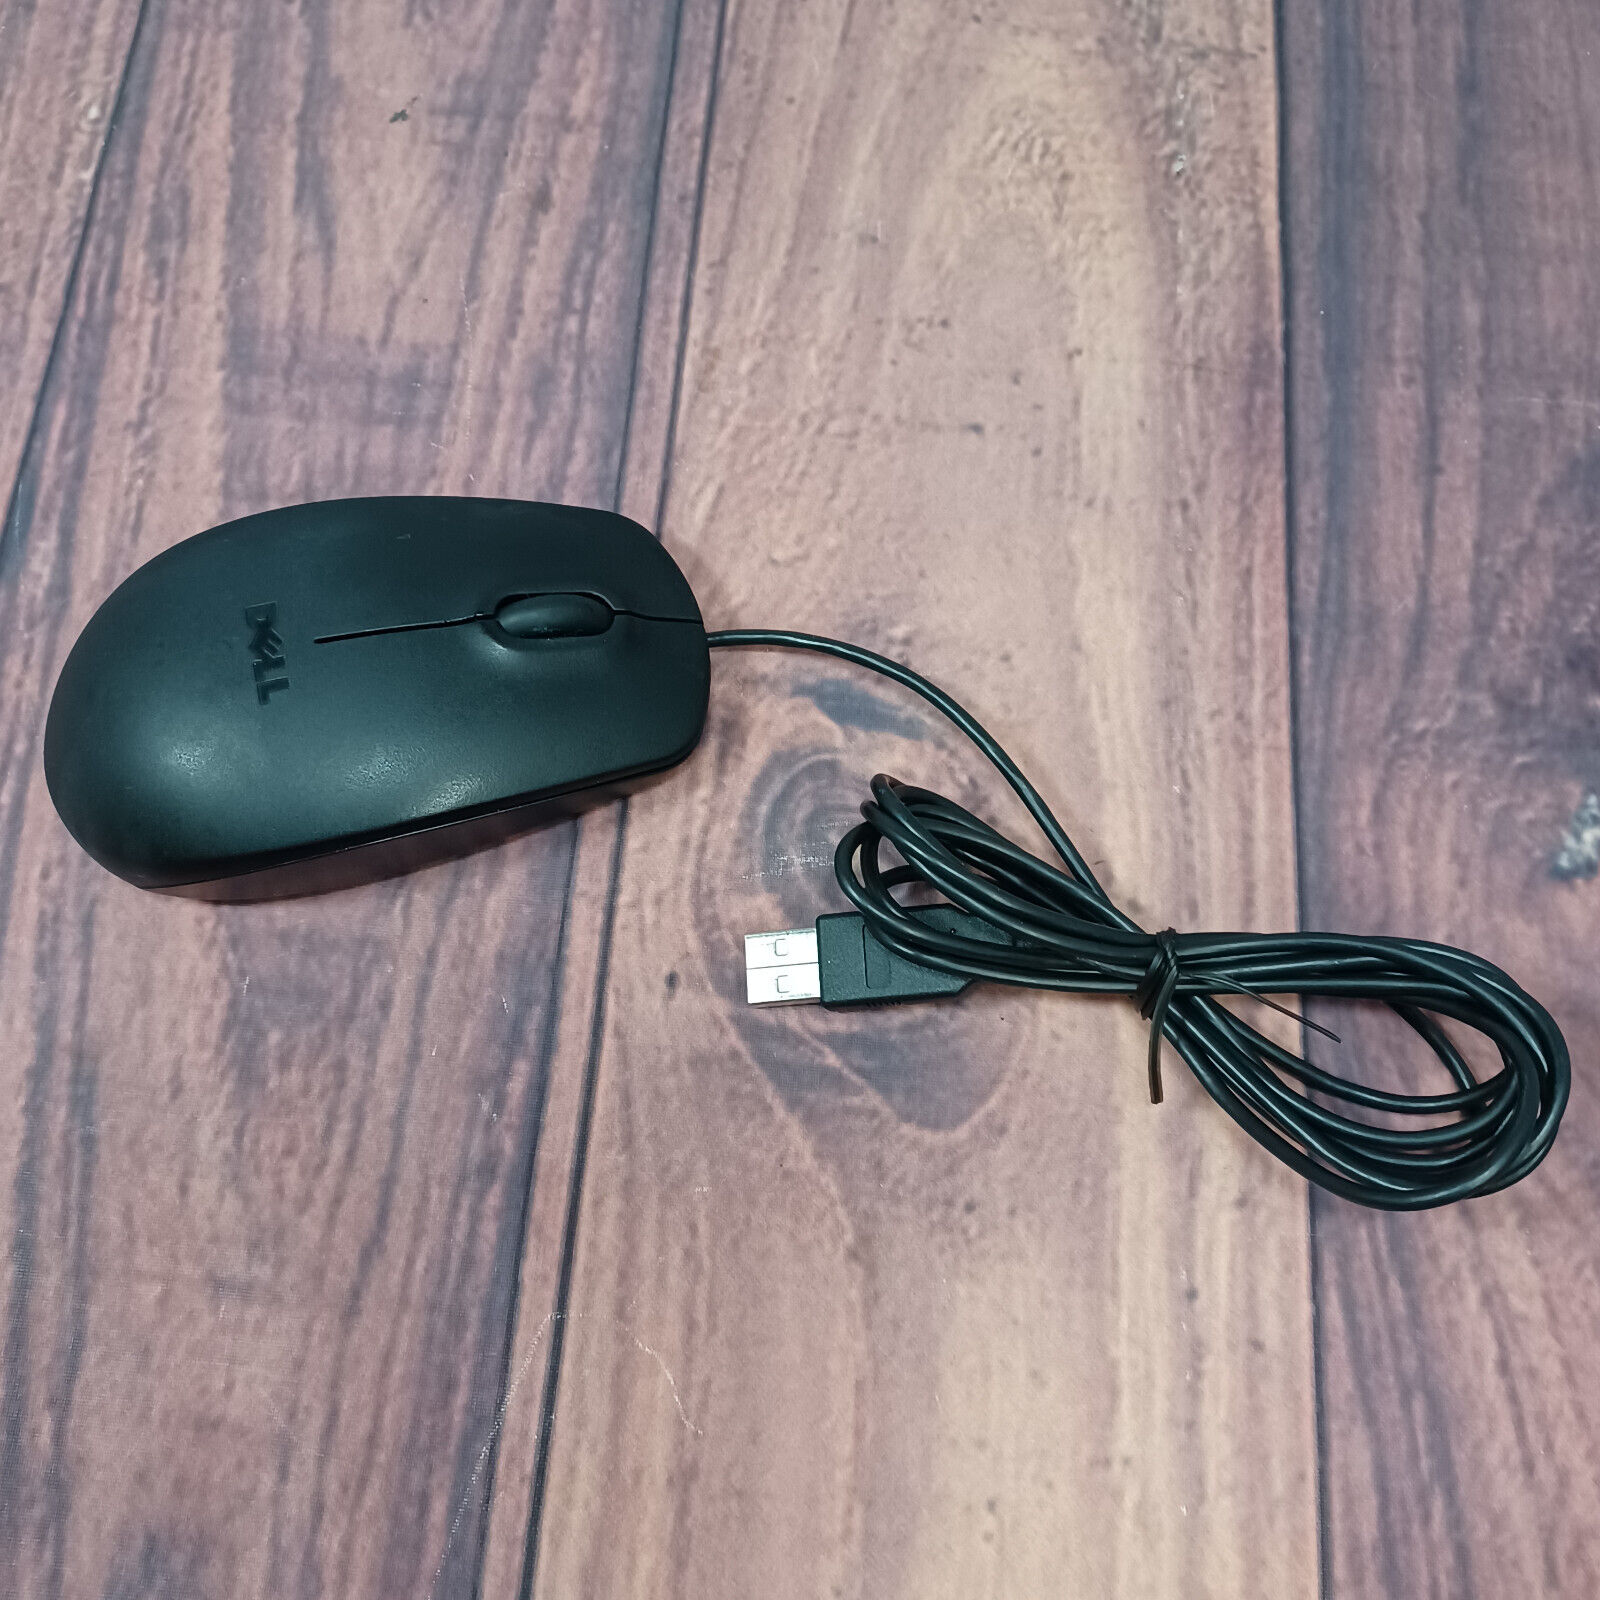 Dell USB Wired Optical Mouse M/N MS111-P (Black) OEM Original